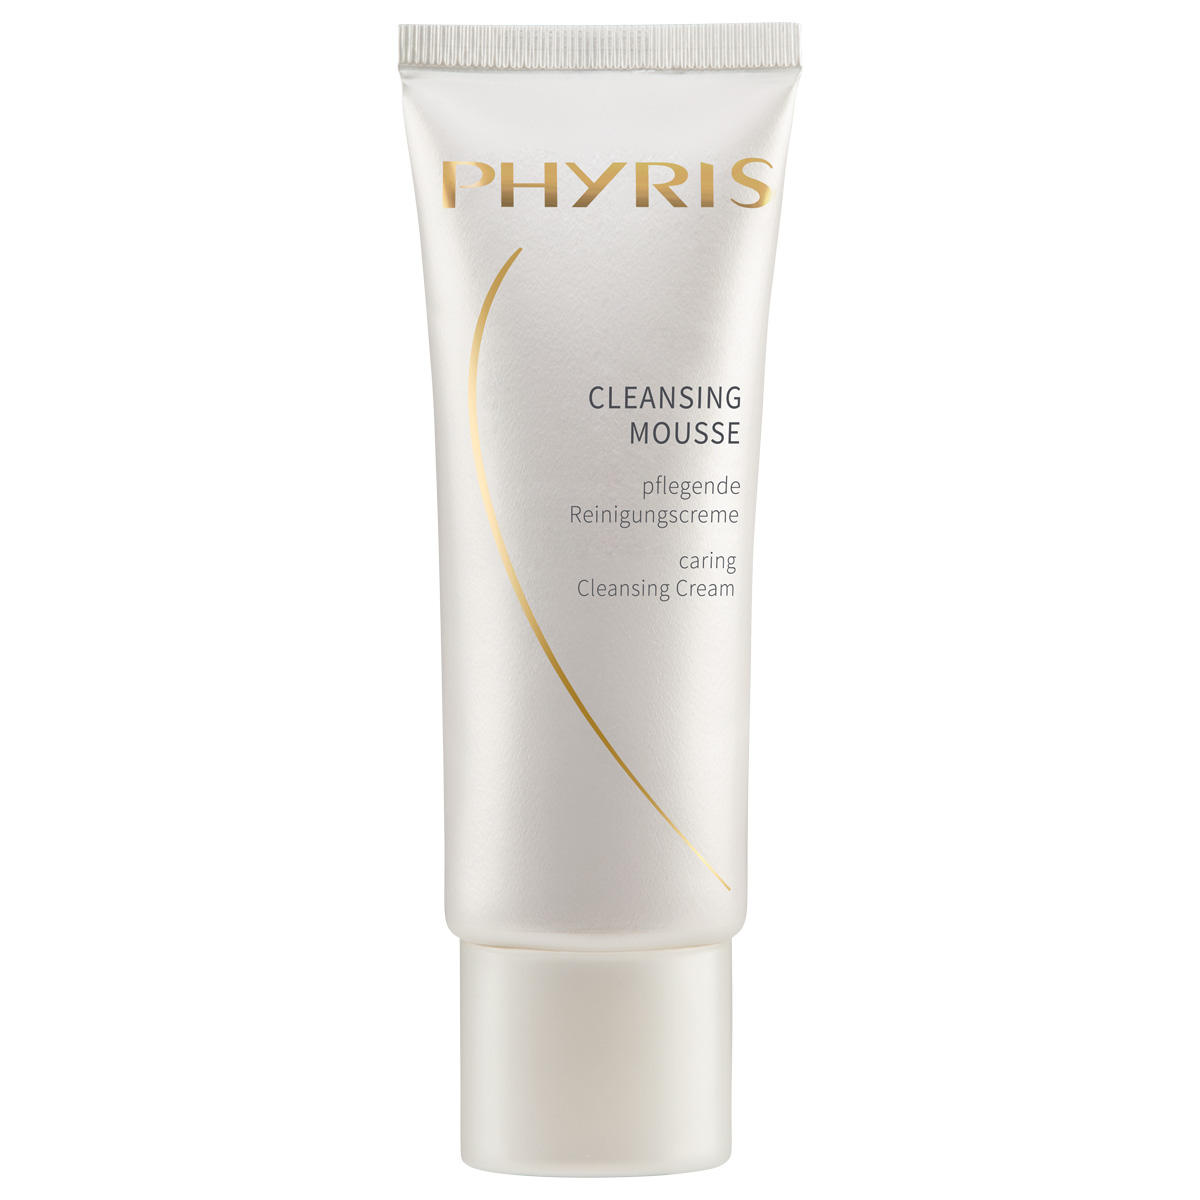 PHYRIS Cleansing Mousse 75 ml - 1